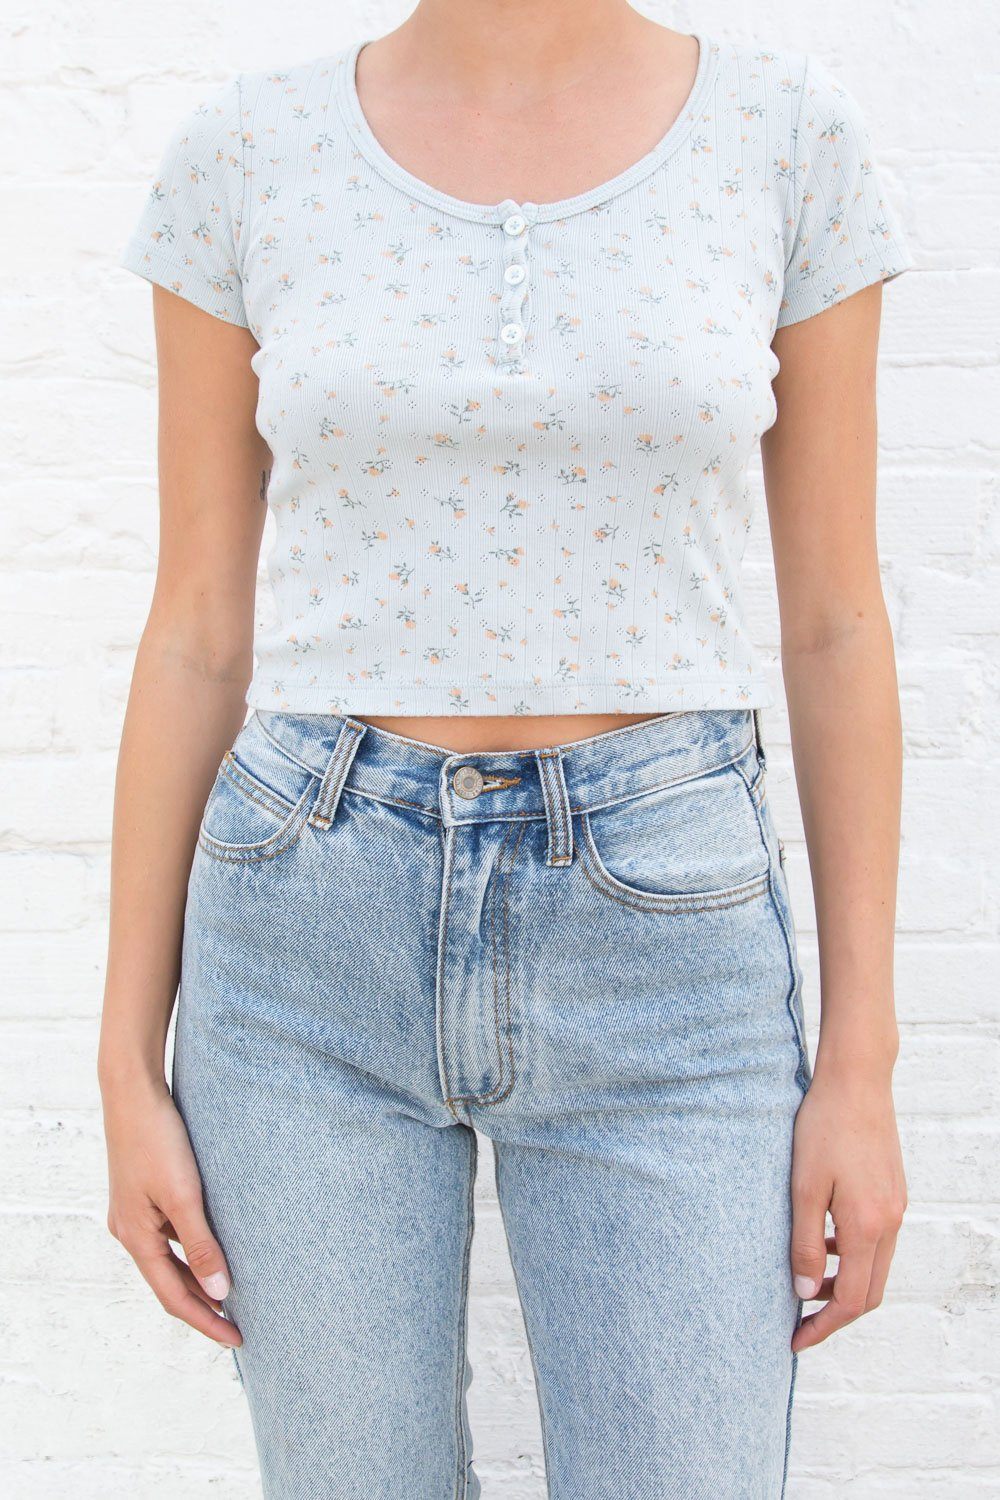 BLUE FLORAL RARE BRANDY MELVILLE TOP FROM FLORENCE  Blue floral top, Brandy  melville top, Floral tops